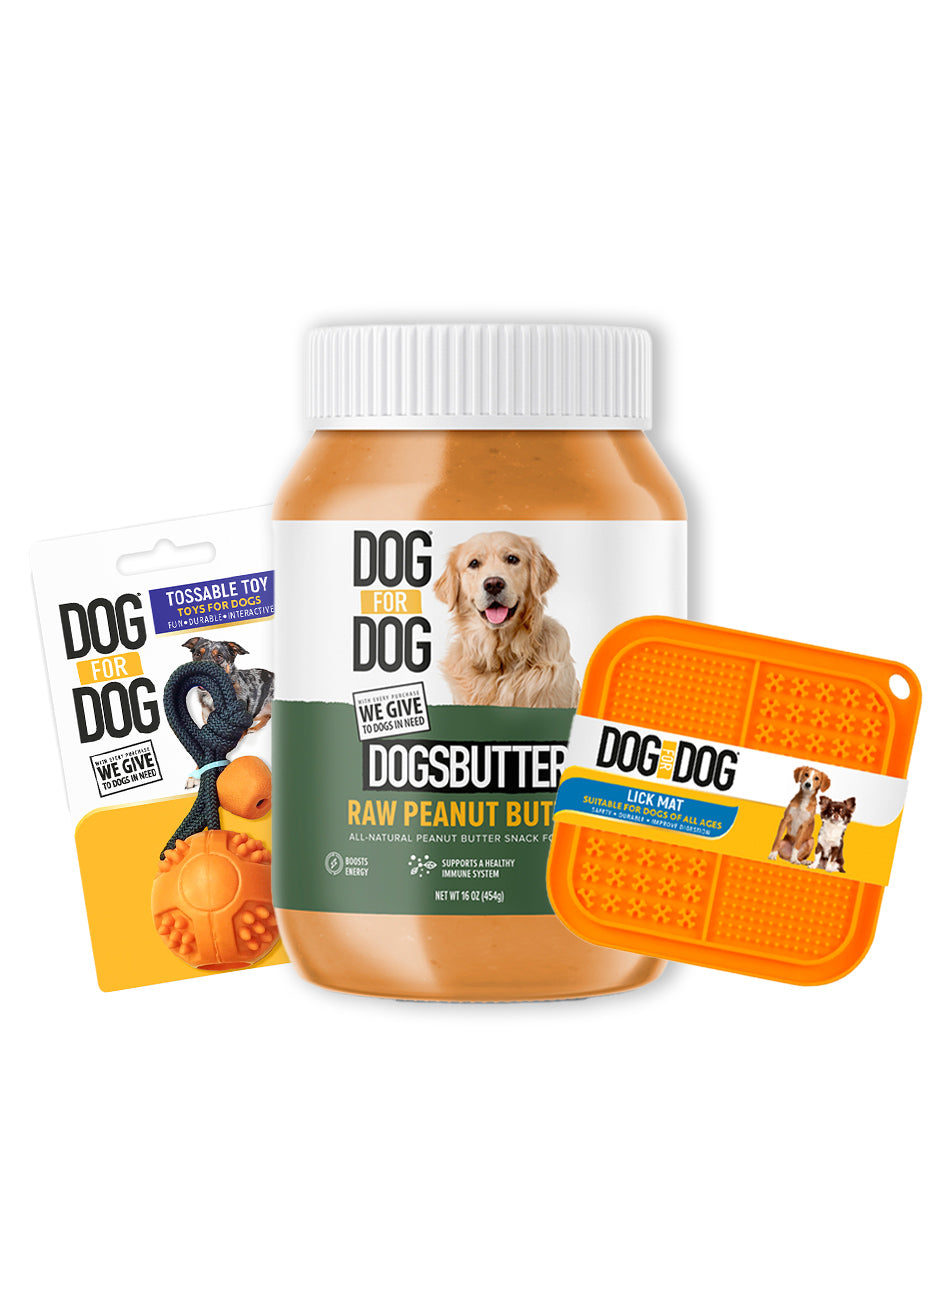 KONG - Peanut Butter Paste - Dog Treat with Real Ingredients, Great for  Mess Free Stuffing Rubber Toys, Made in The USA